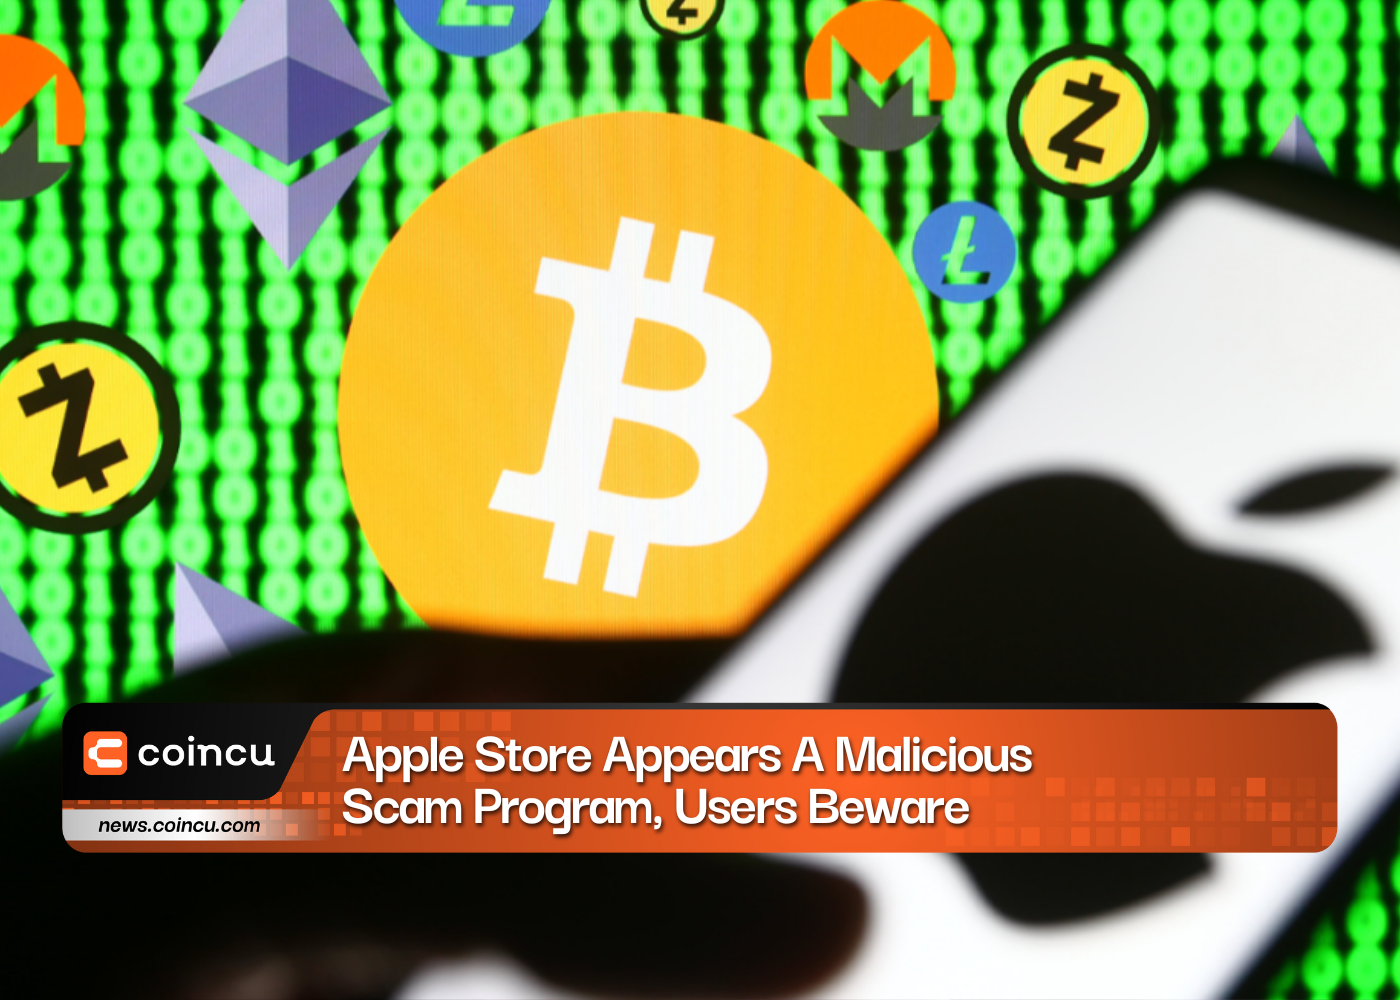 Apple Store Appears A Malicious Scam Program, Users Beware